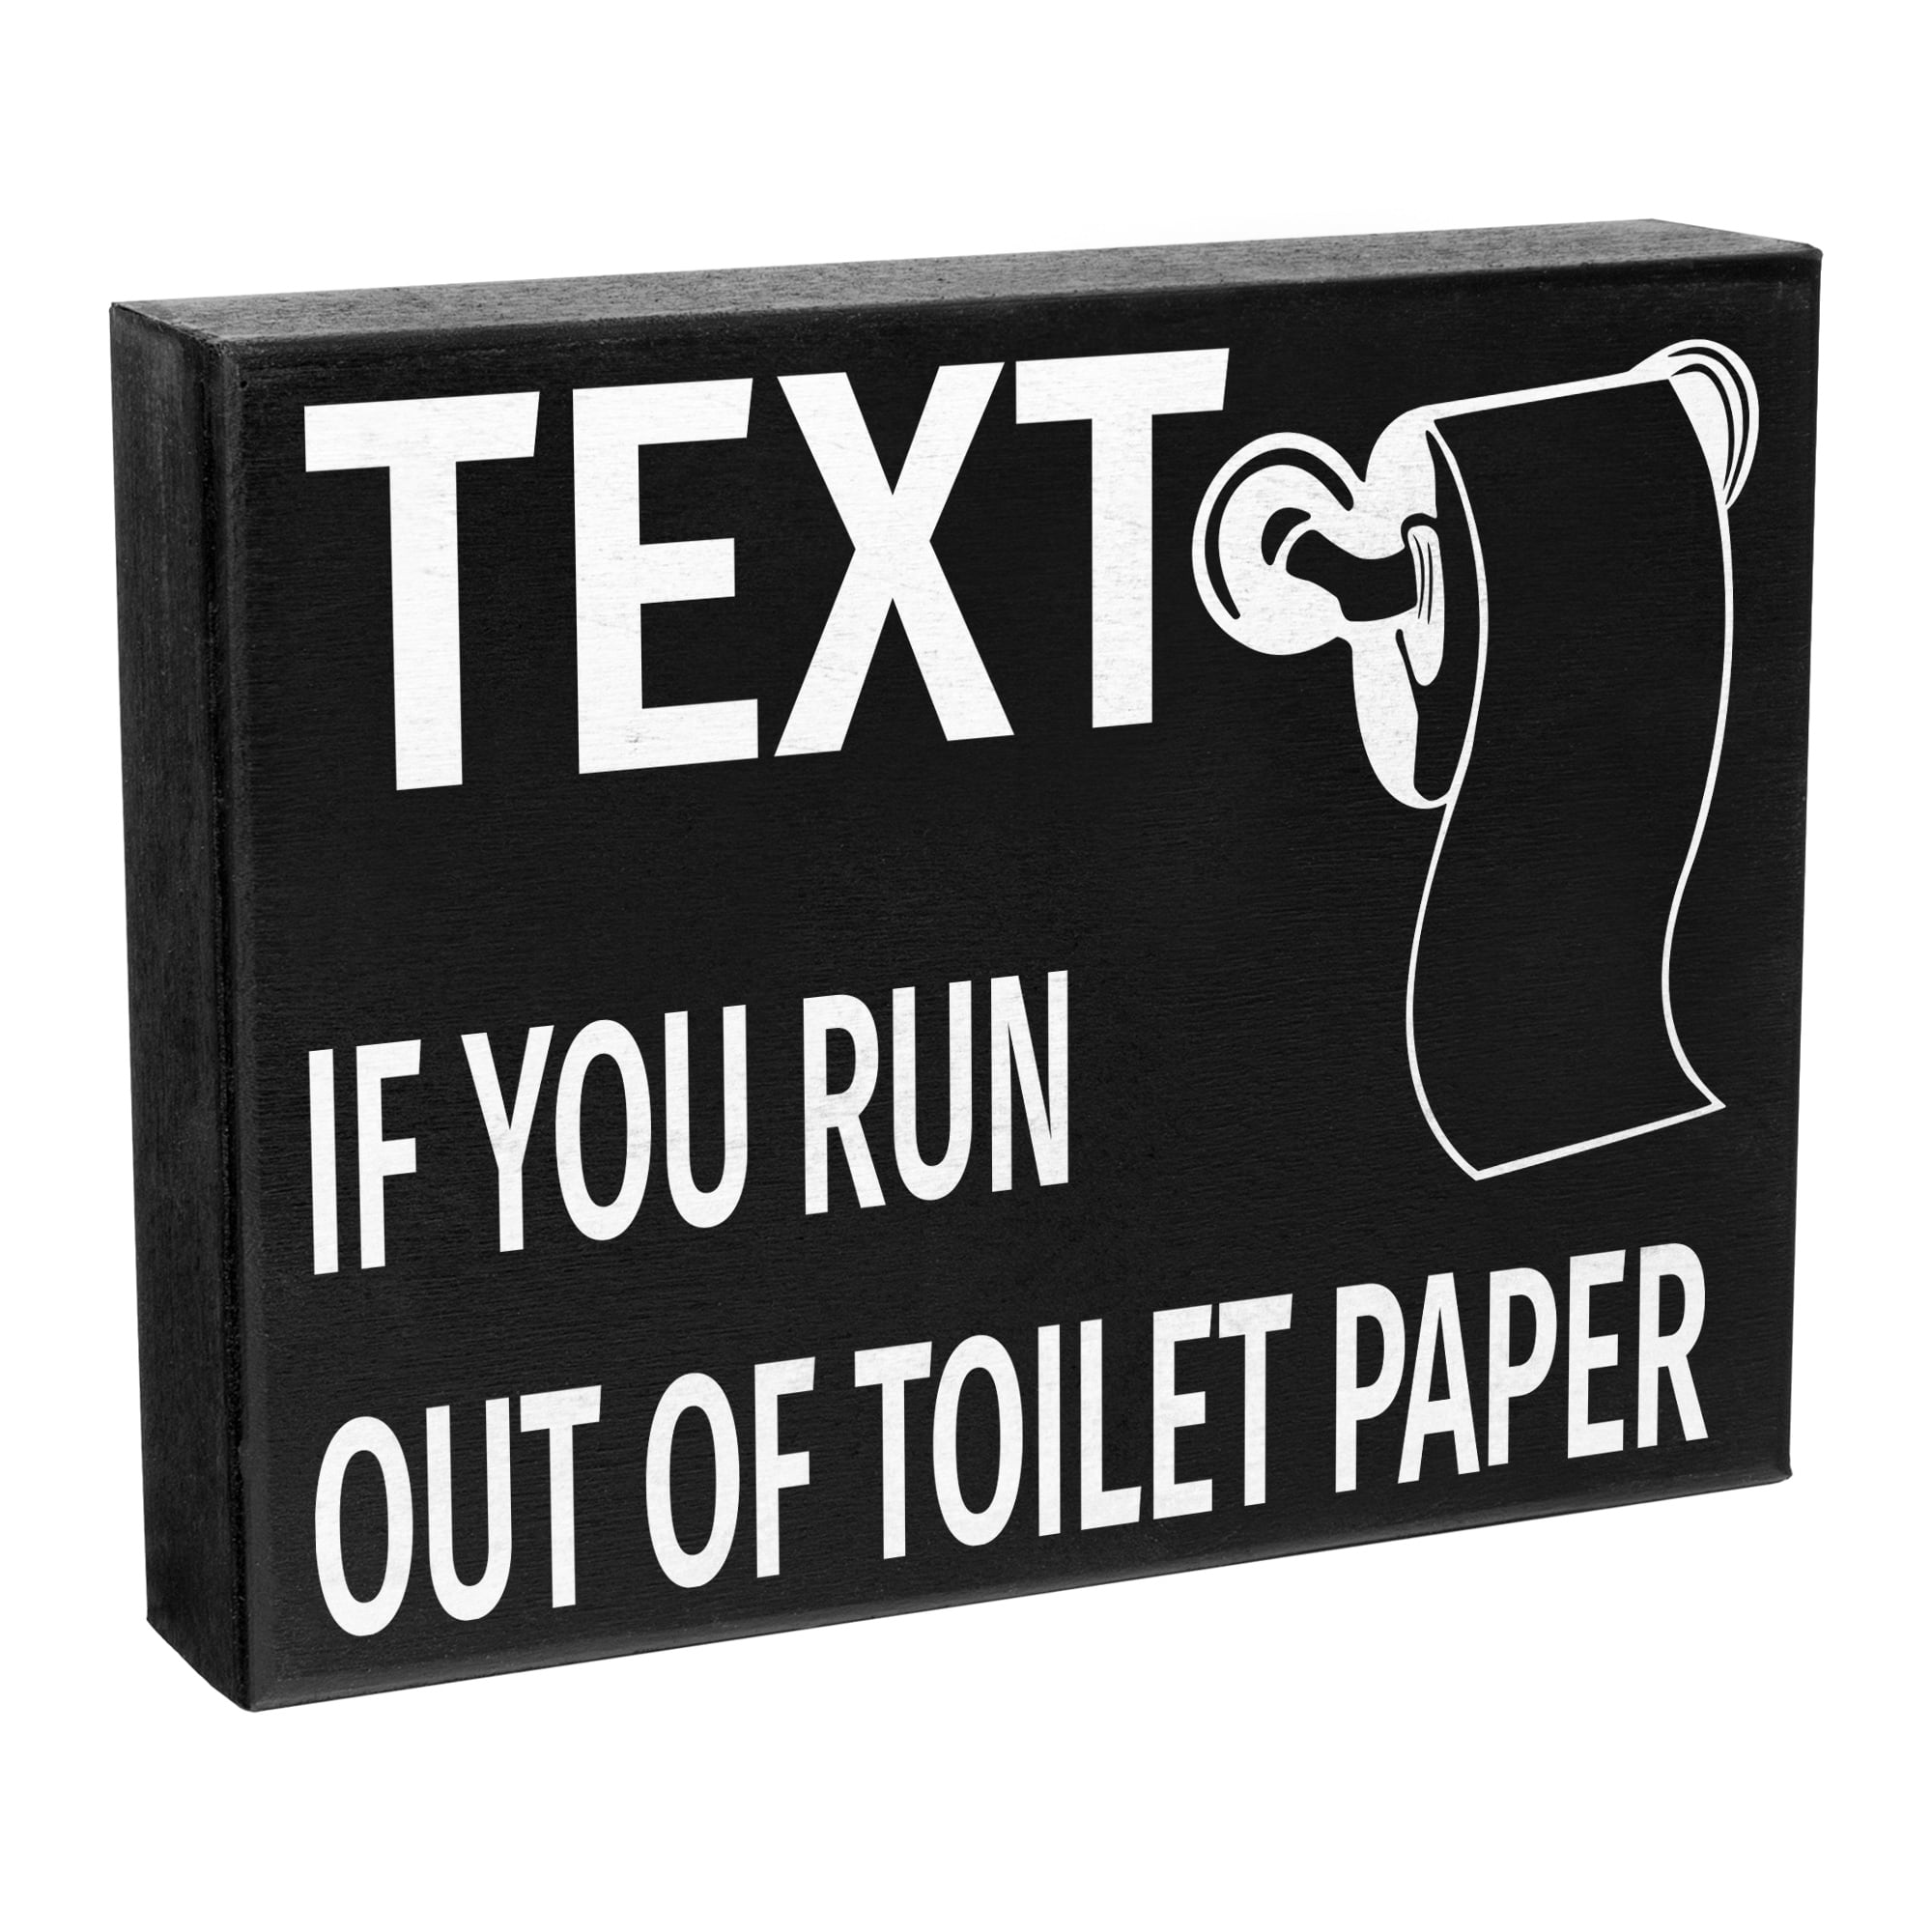 JennyGems Funny Bathroom Signs, Text If You Run Out Of Toilet Paper, 8x6  in, Funny Bathroom Decor, Bathroom Wall Decorations, Toilet Paper Decor,  Made in USA 